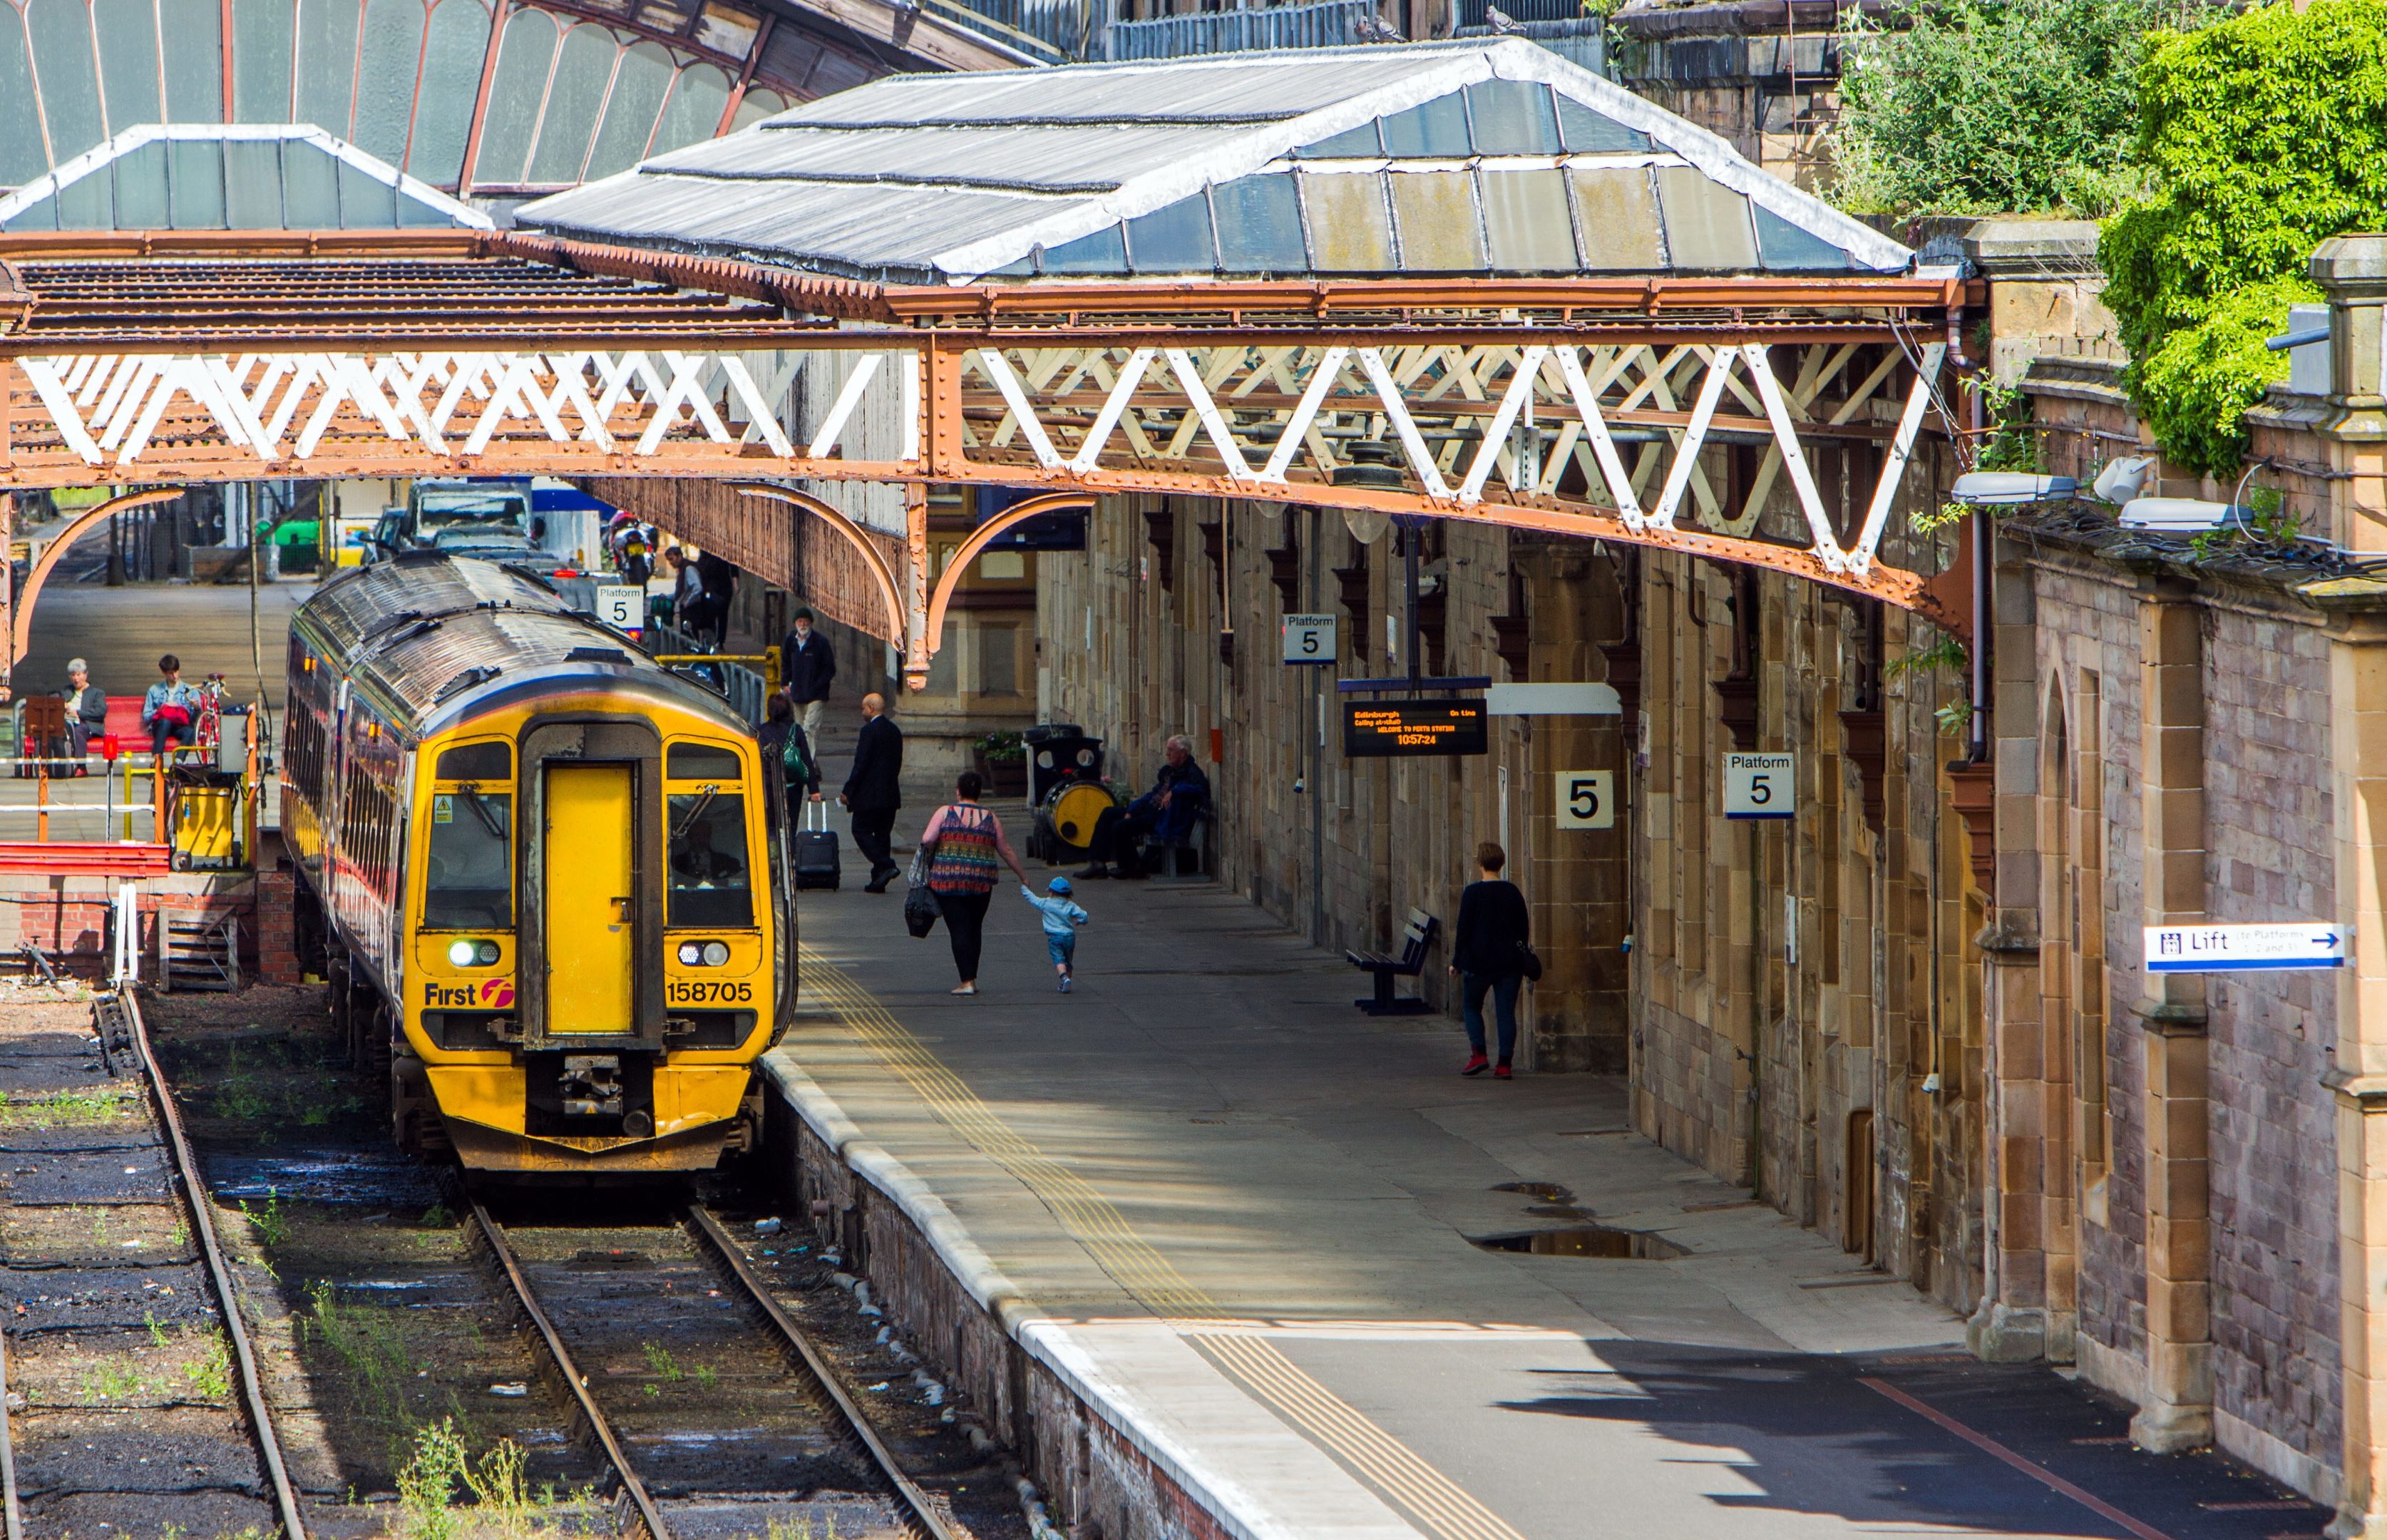 Buses are replacing trains between Perth and Pitlochry.